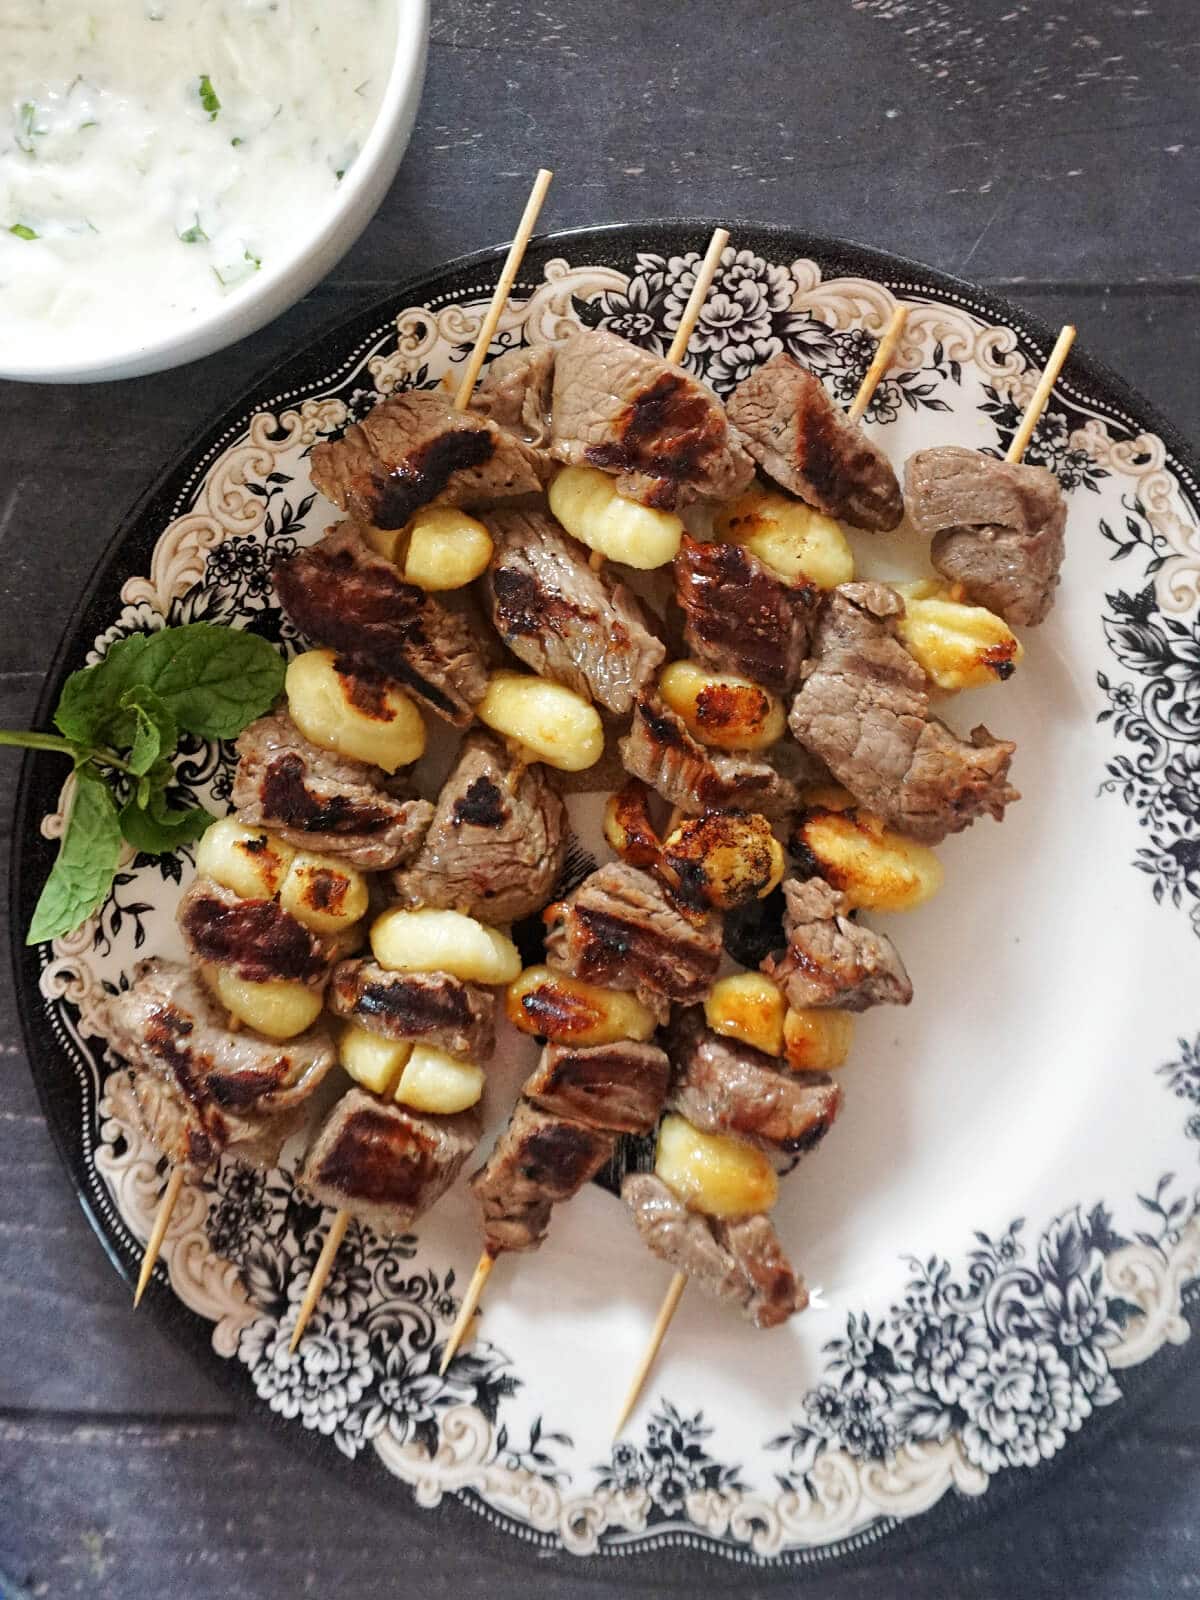 A plate with 4 skewers with gnocchi and beef cubes